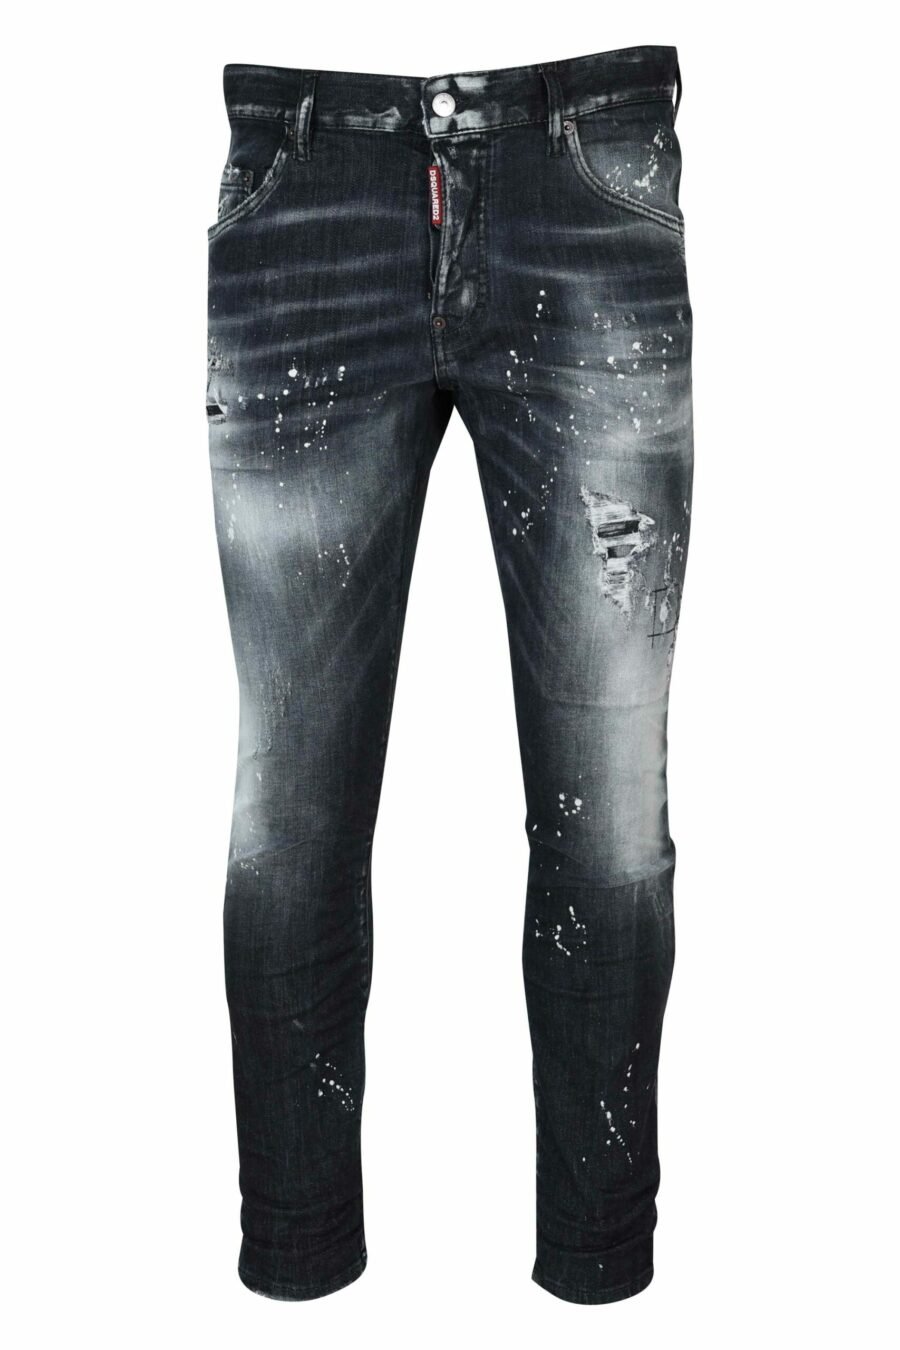 Black "skater jean" jeans with ripped and torn - 8054148474126 scaled